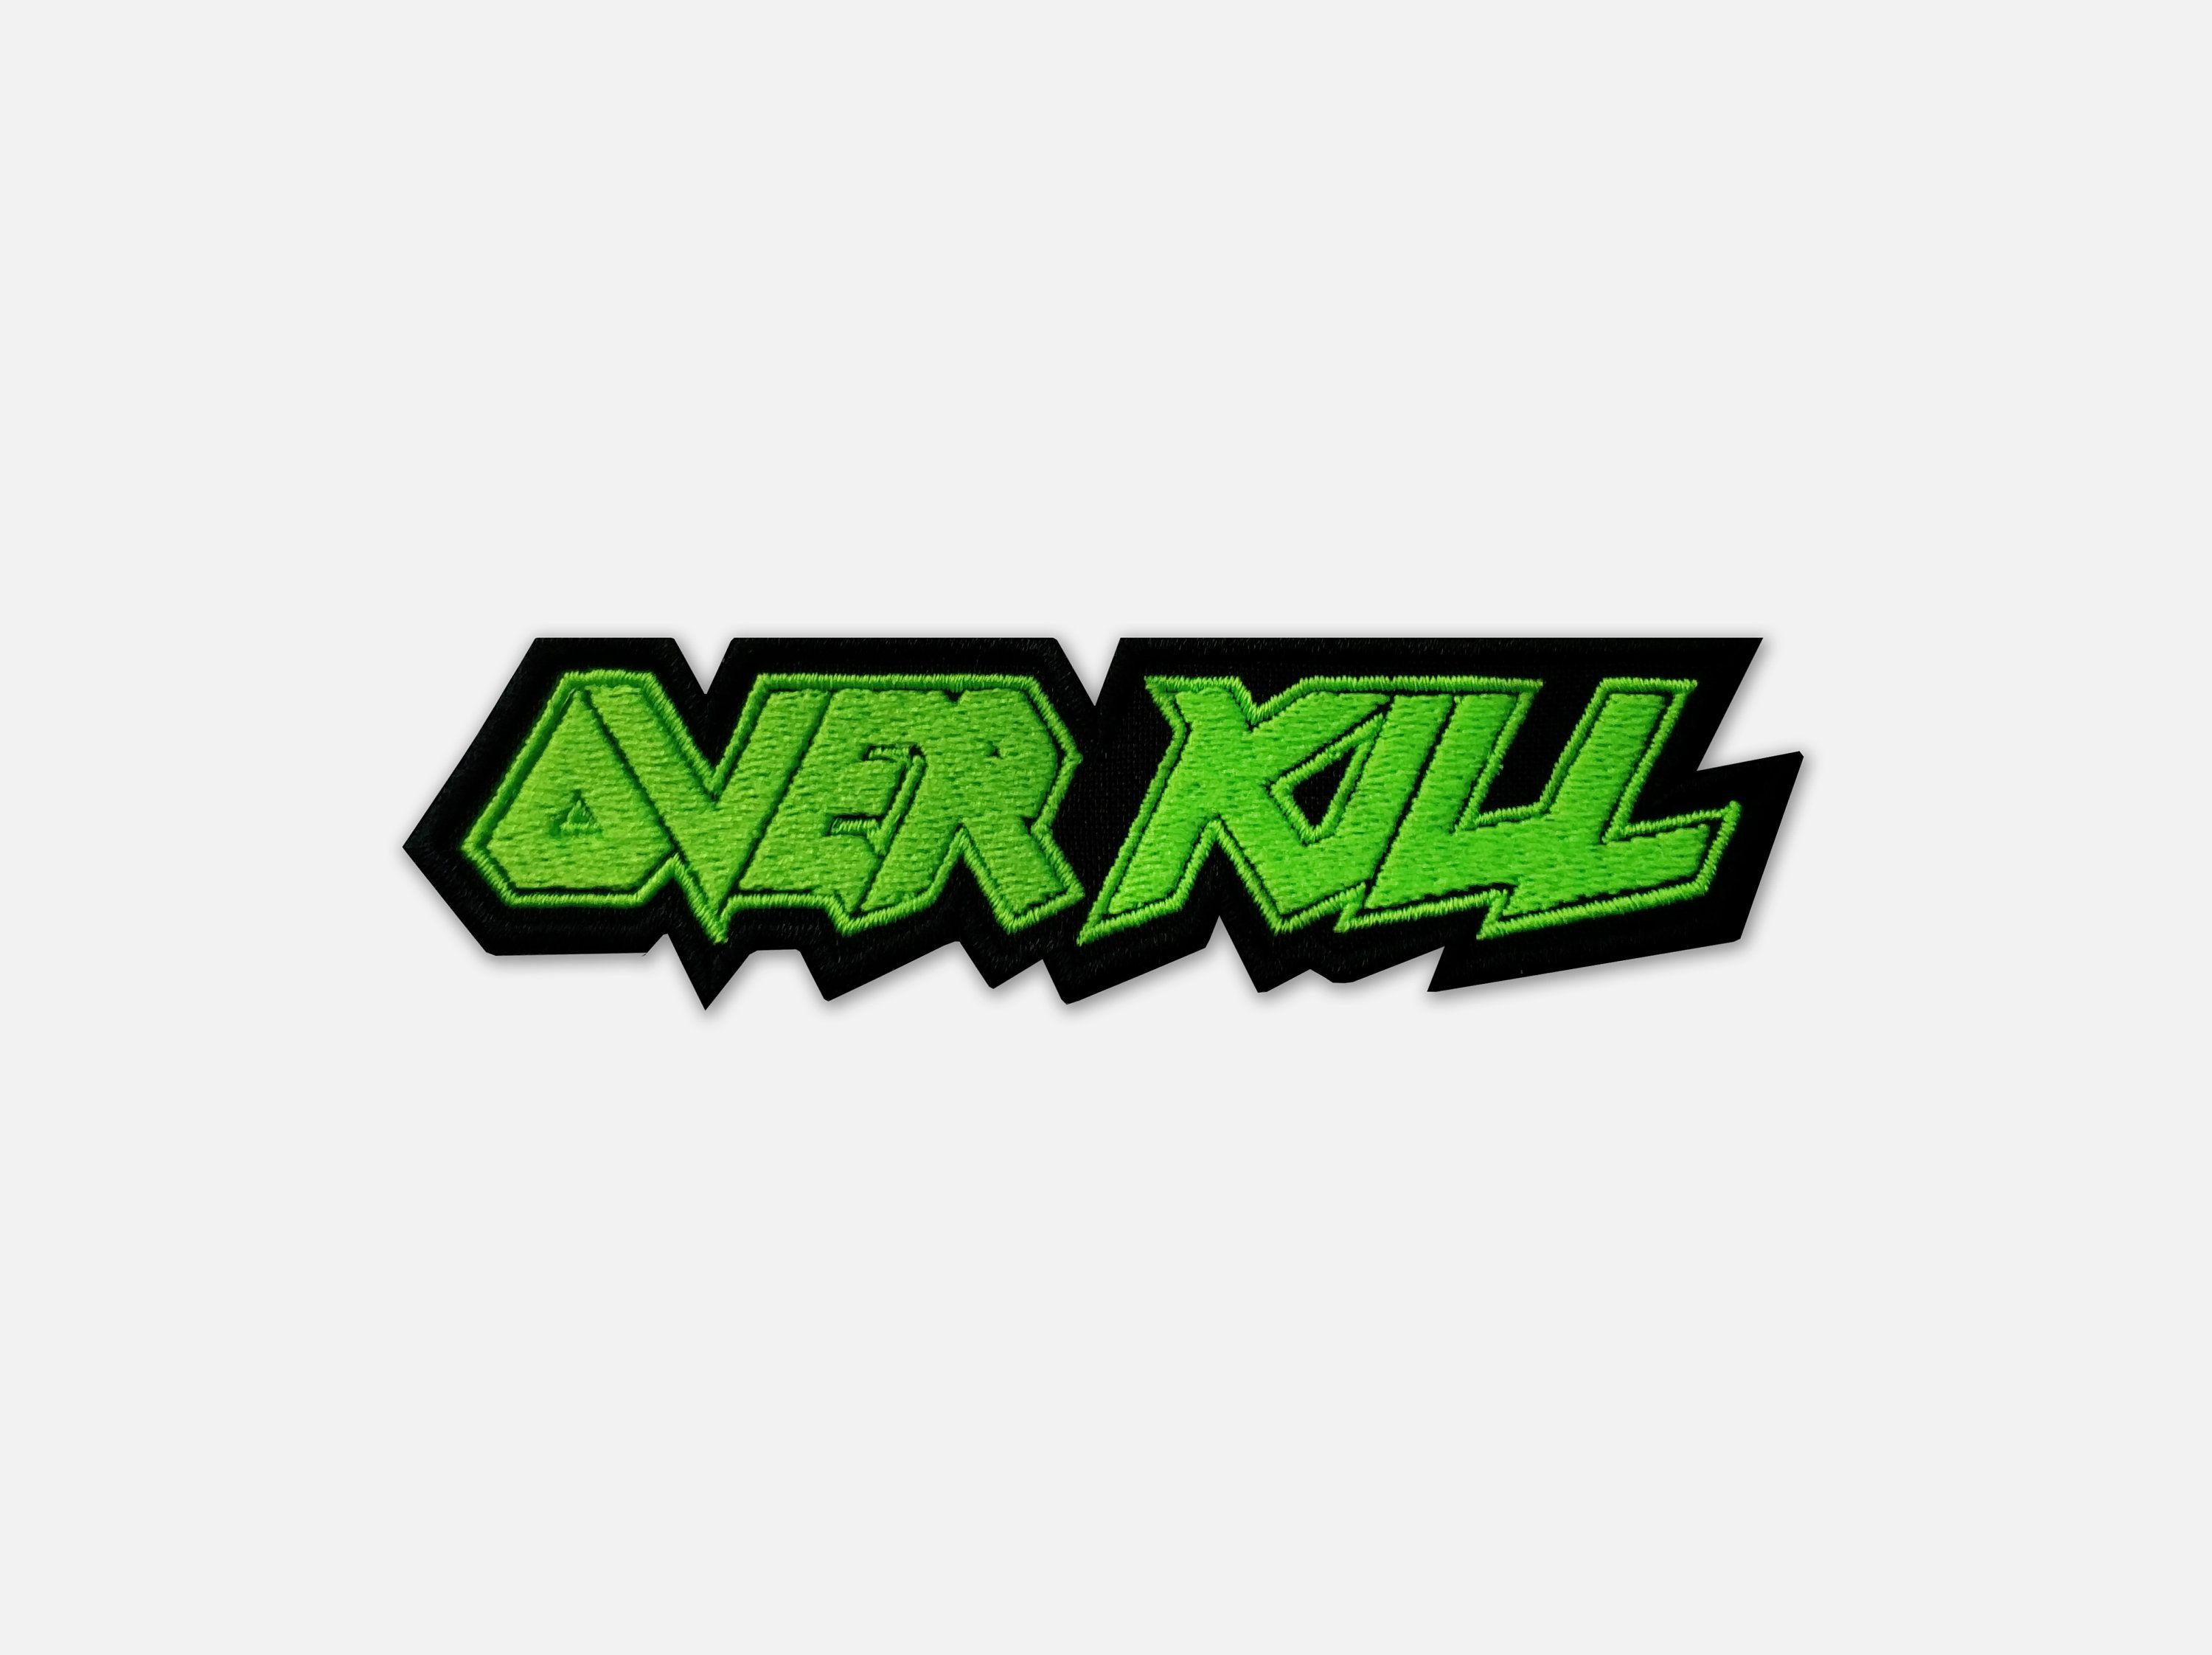 Overkill Logo - Overkill logo embroidered patch Thrash Metal band | Etsy